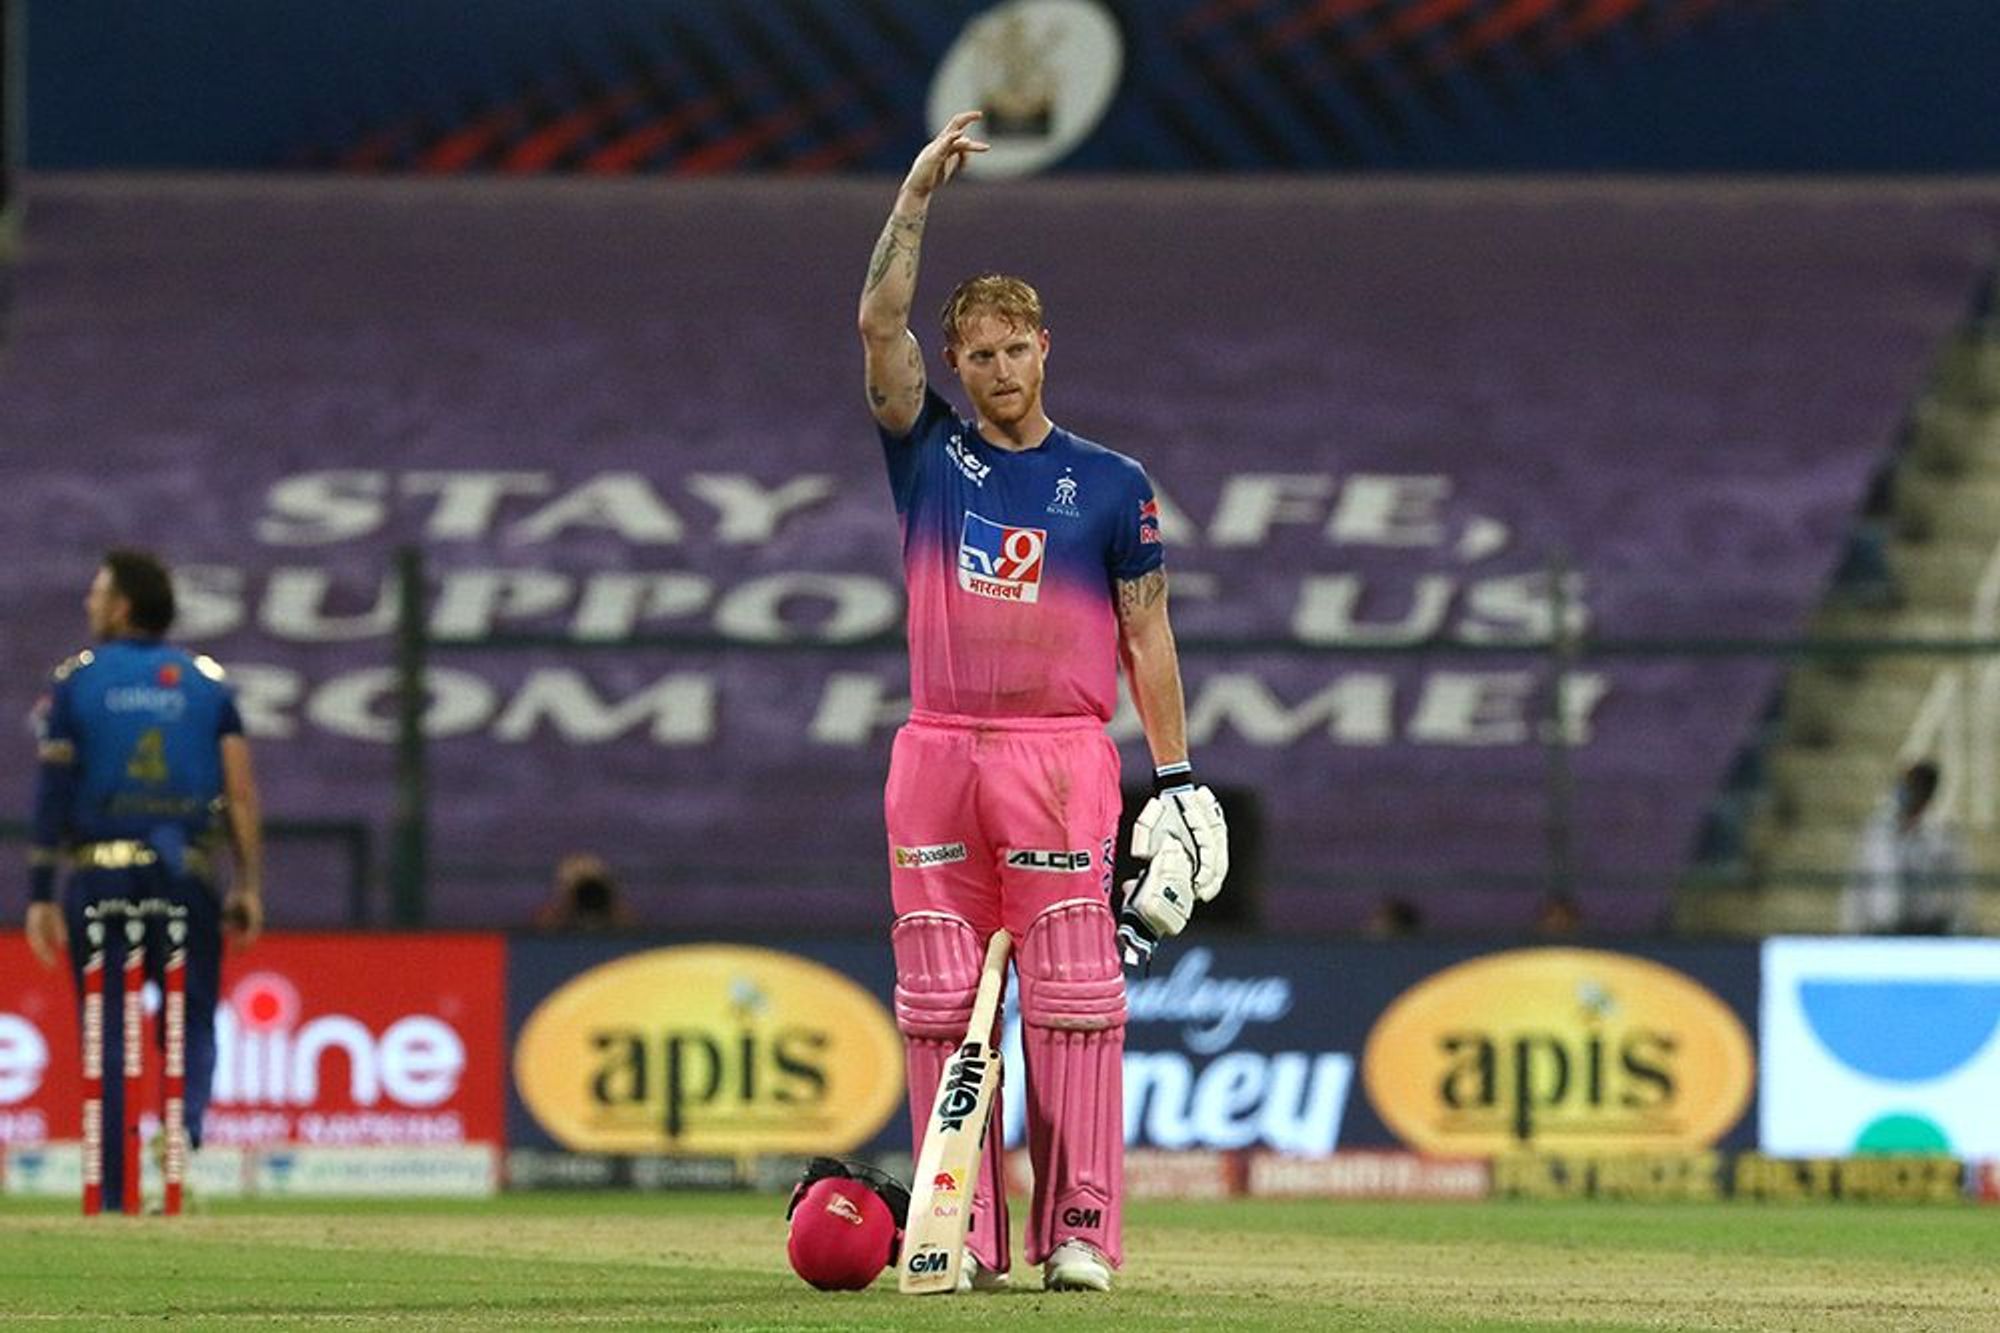 Test cricket is my number one priority, says Ben Stokes on skipping IPL mega auction 